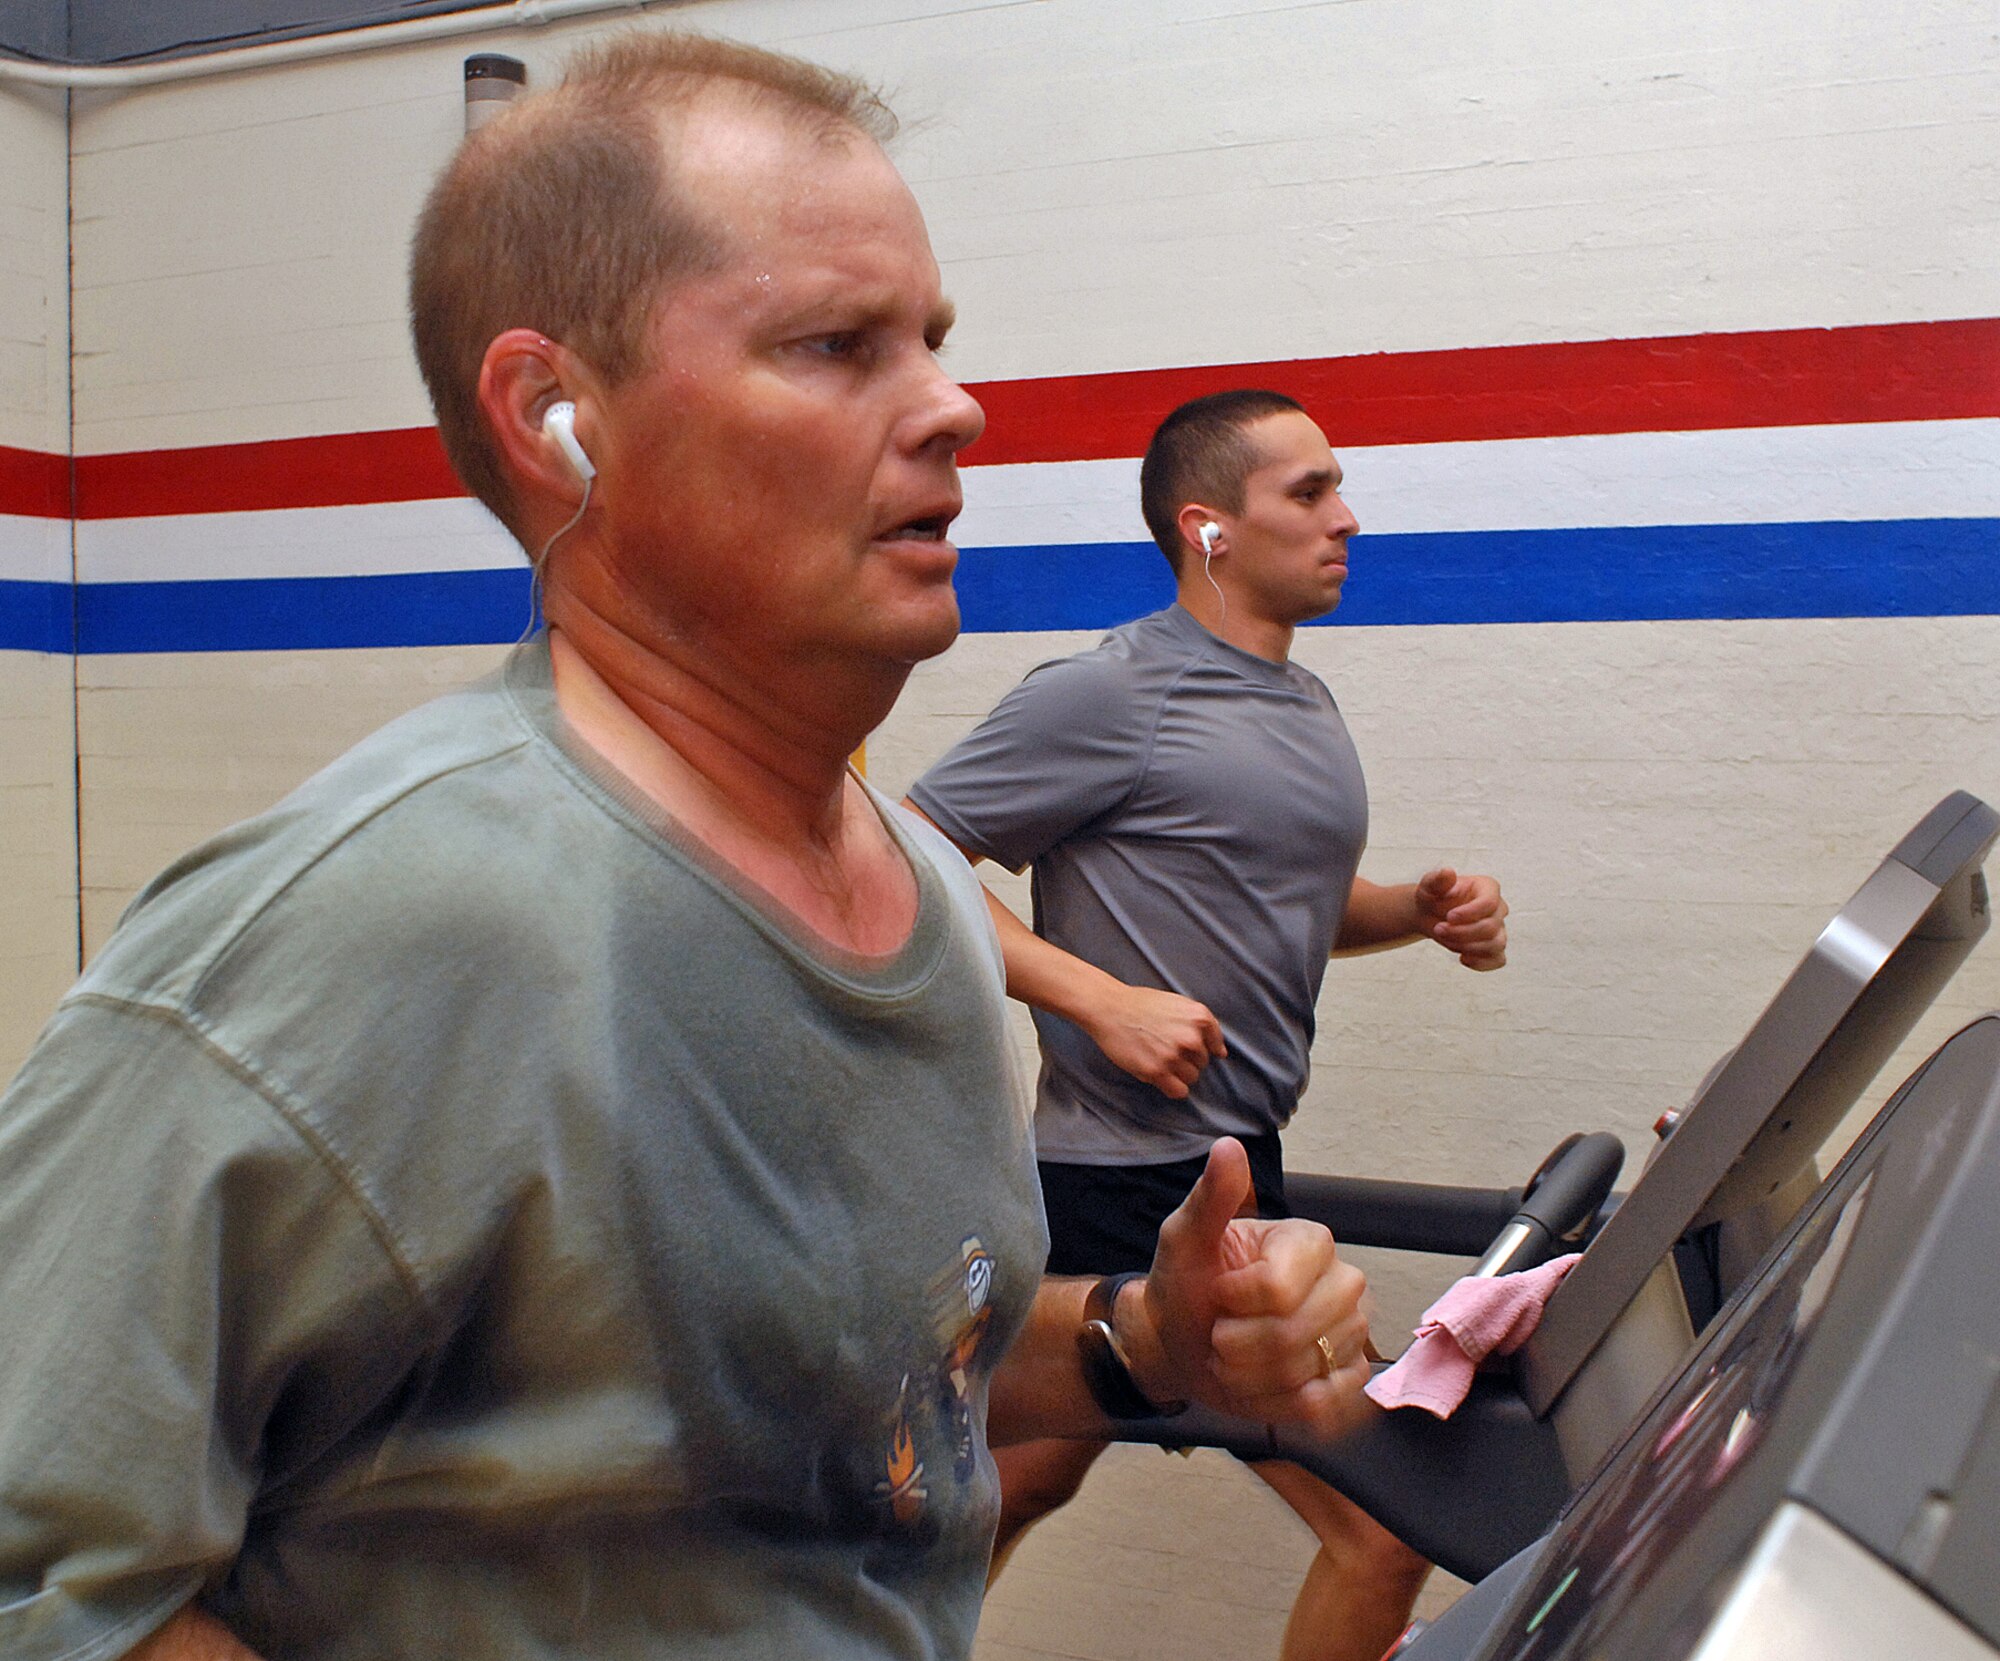 Lt. Col. Kurt Austin, Air Force Operational Test and Evaluation Center, and 1st Lt. Robert Lady, Space Development and Test Wing, run on tread mills at a fitness center here. (U.S. Air Force photo by Todd Berenger)